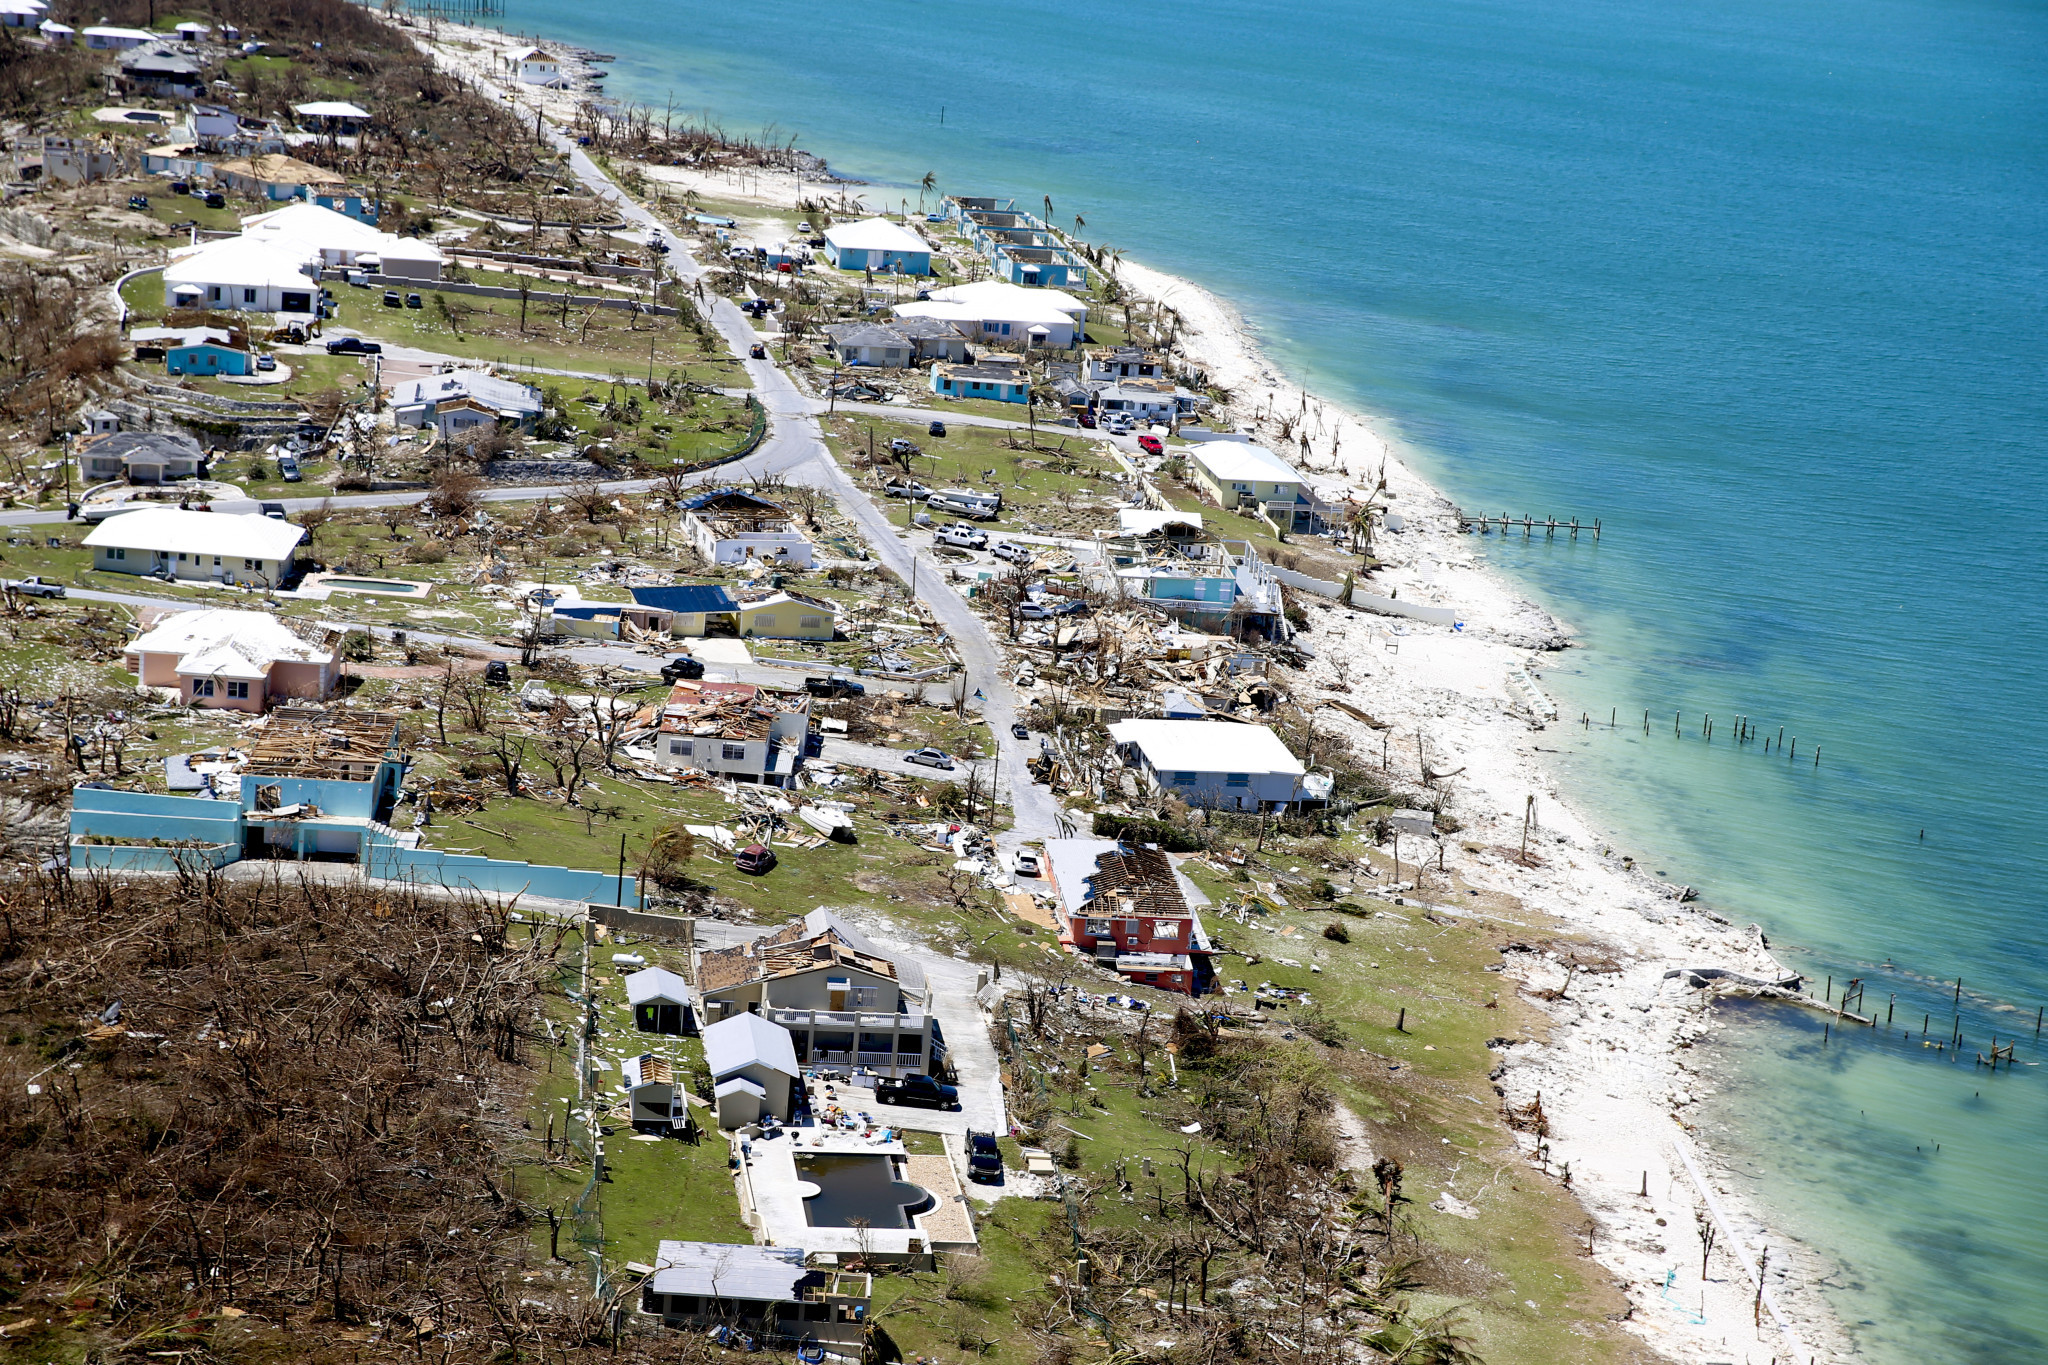 Bahamas Olympic Committee to assist Hurricane Dorian relief efforts